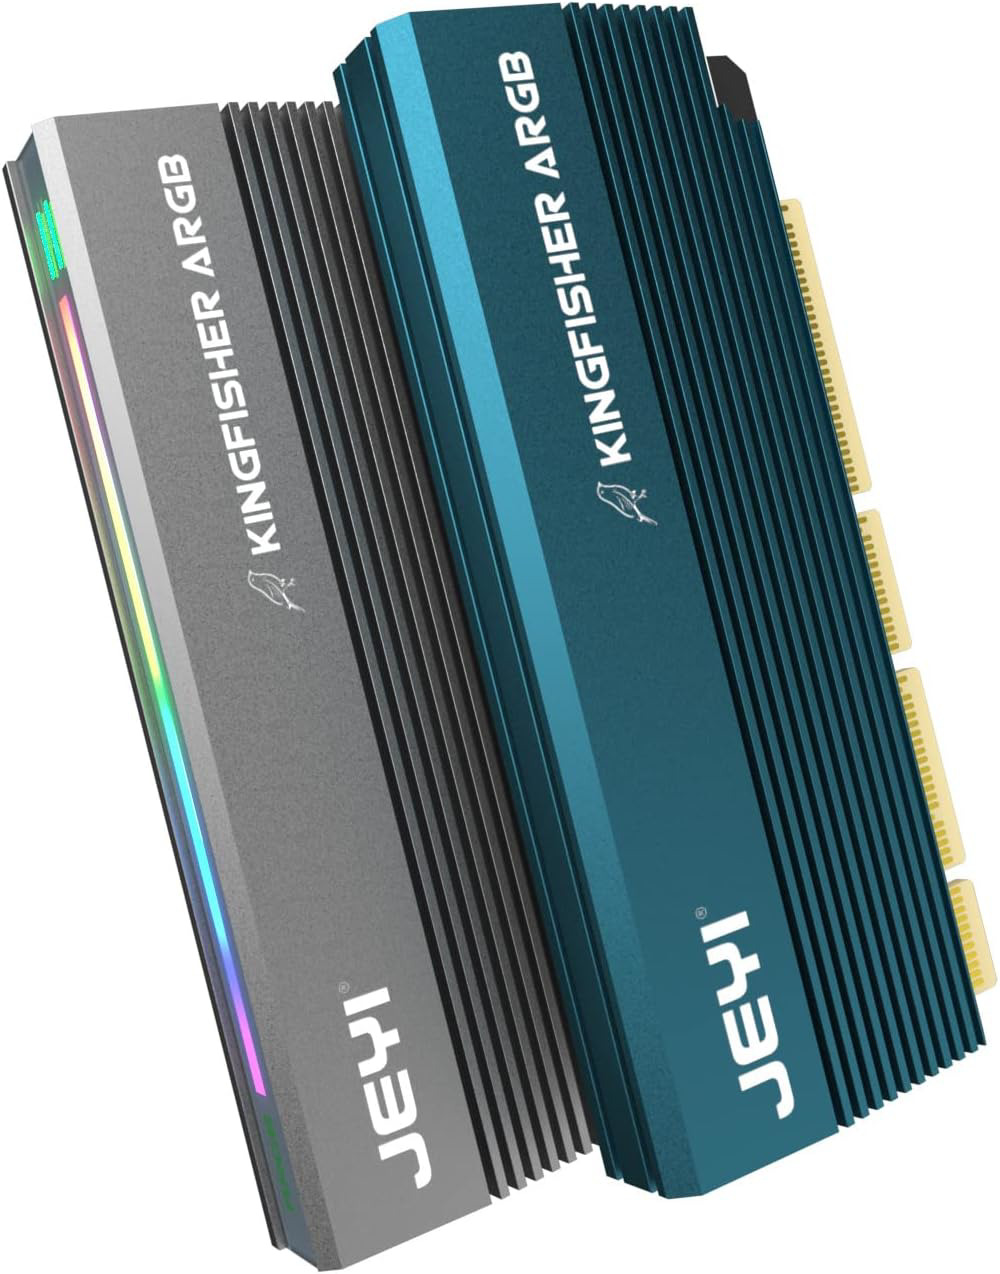 JEYI RGB NVMe M.2 SSD to PCIe X16/X8/X4 Adapter Card with Aluminum Heat Sink (wi